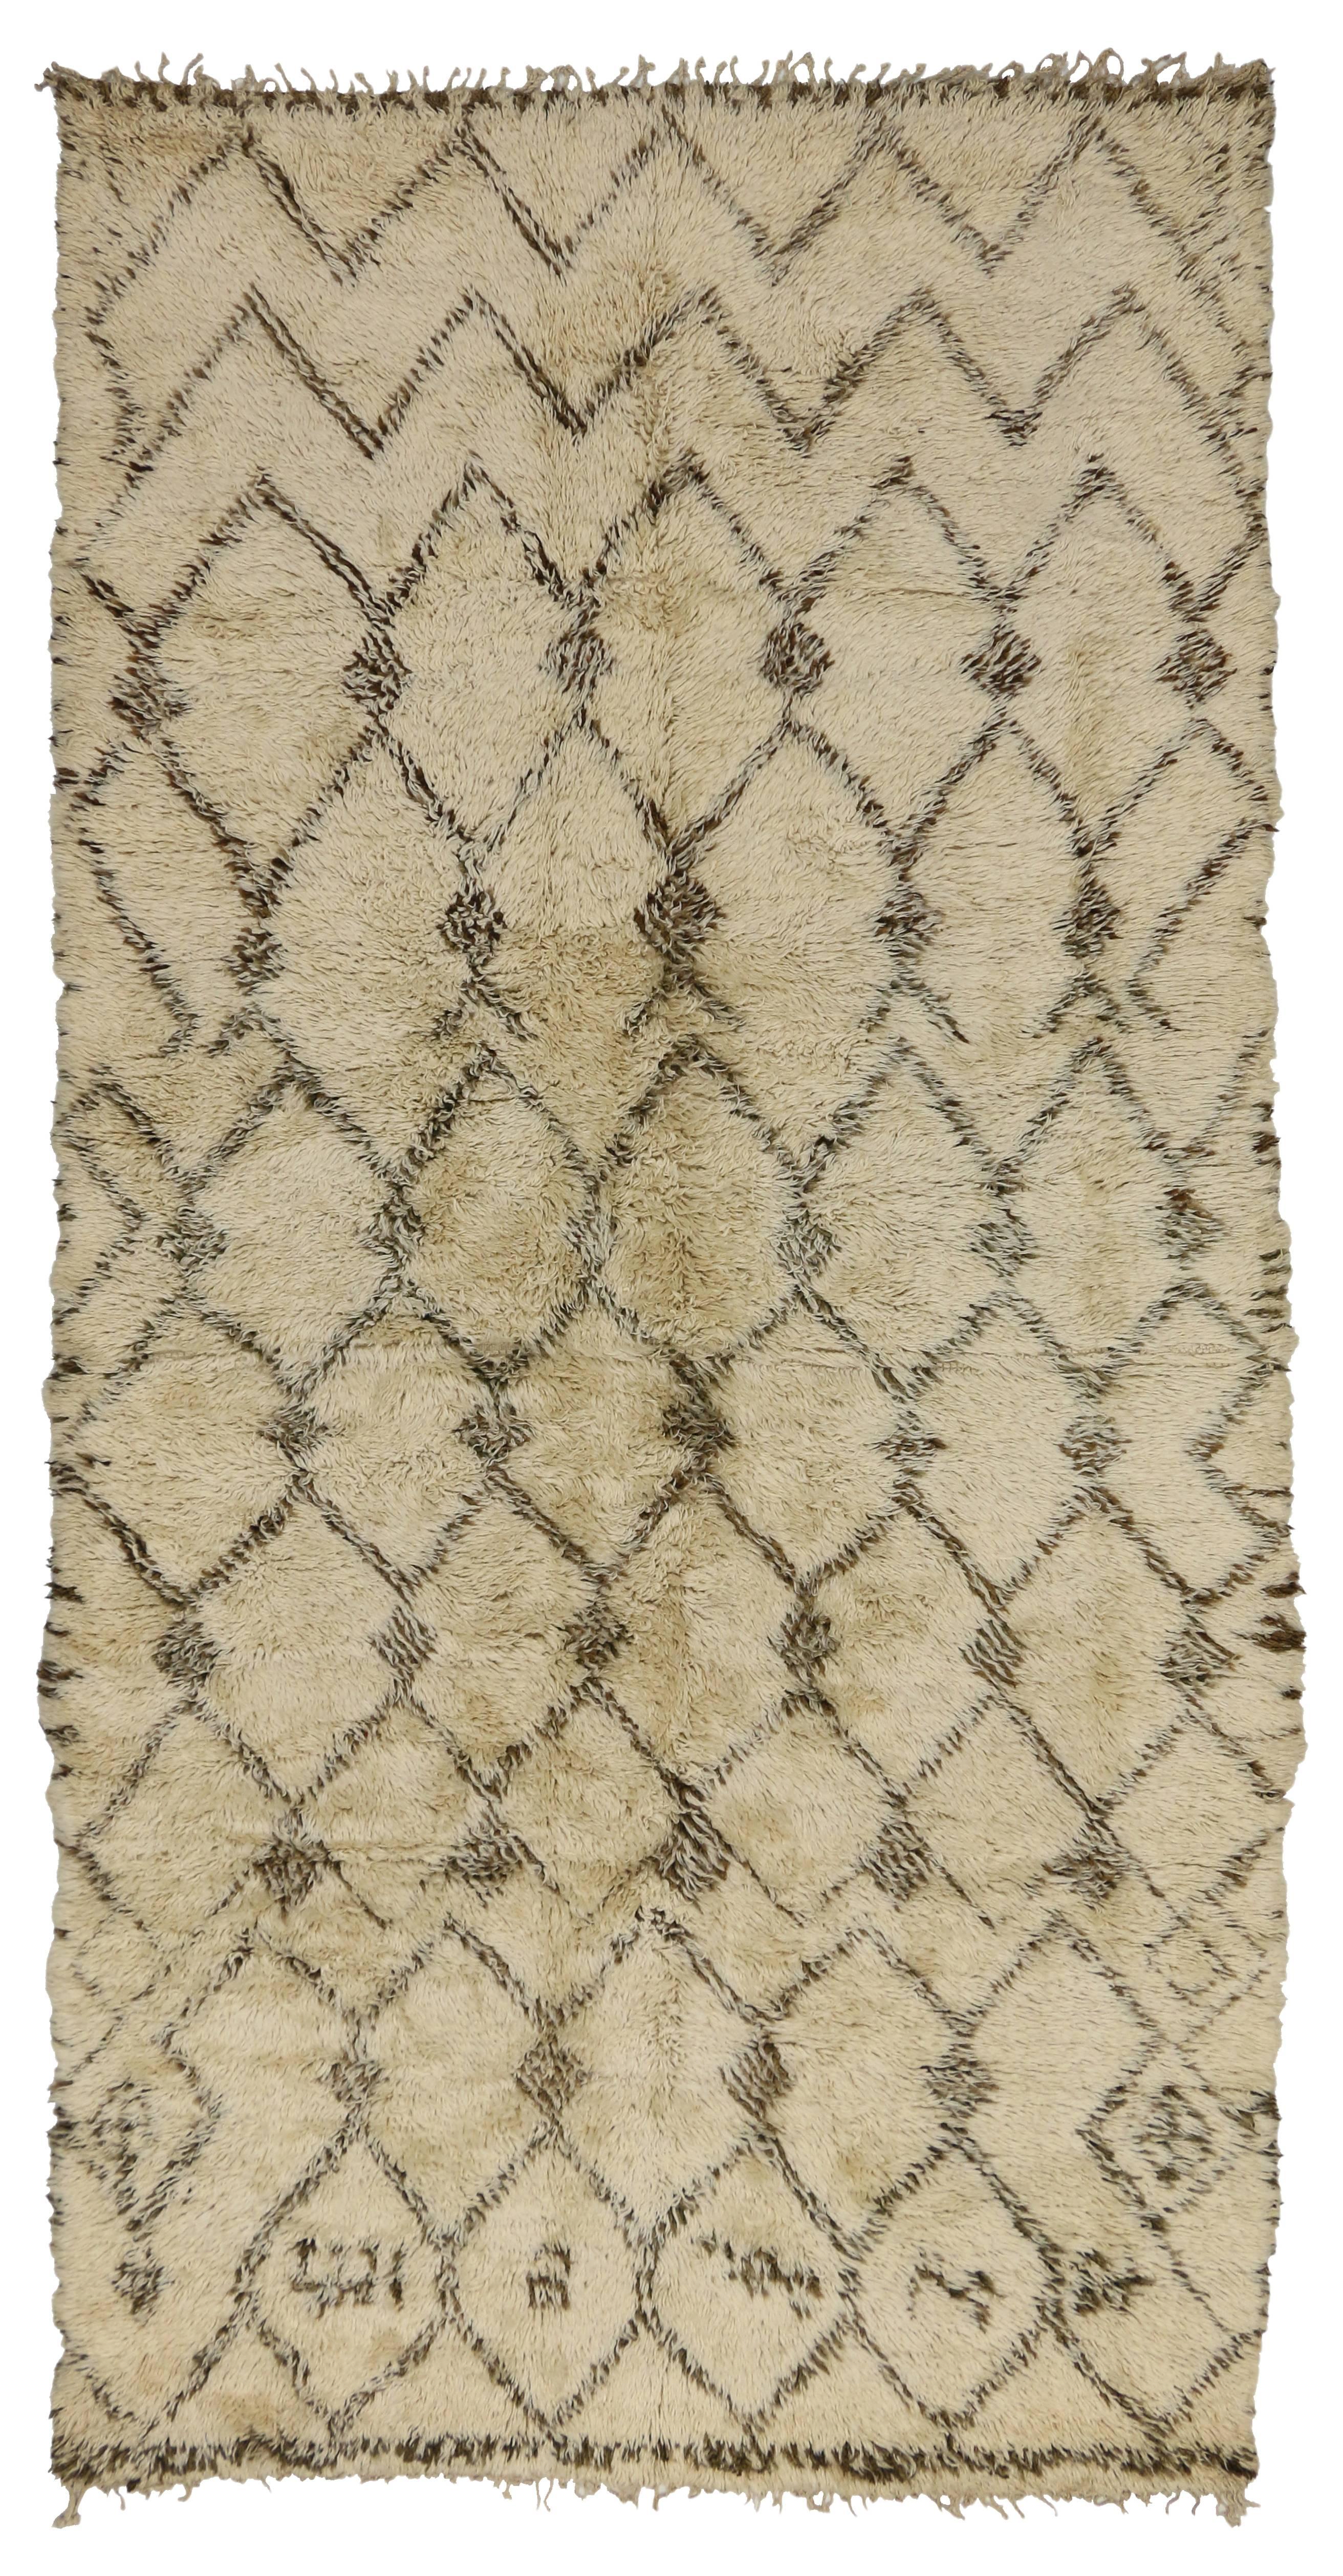 Wool Vintage Beni Ourain Moroccan Rug with Mid-Century Modern Style